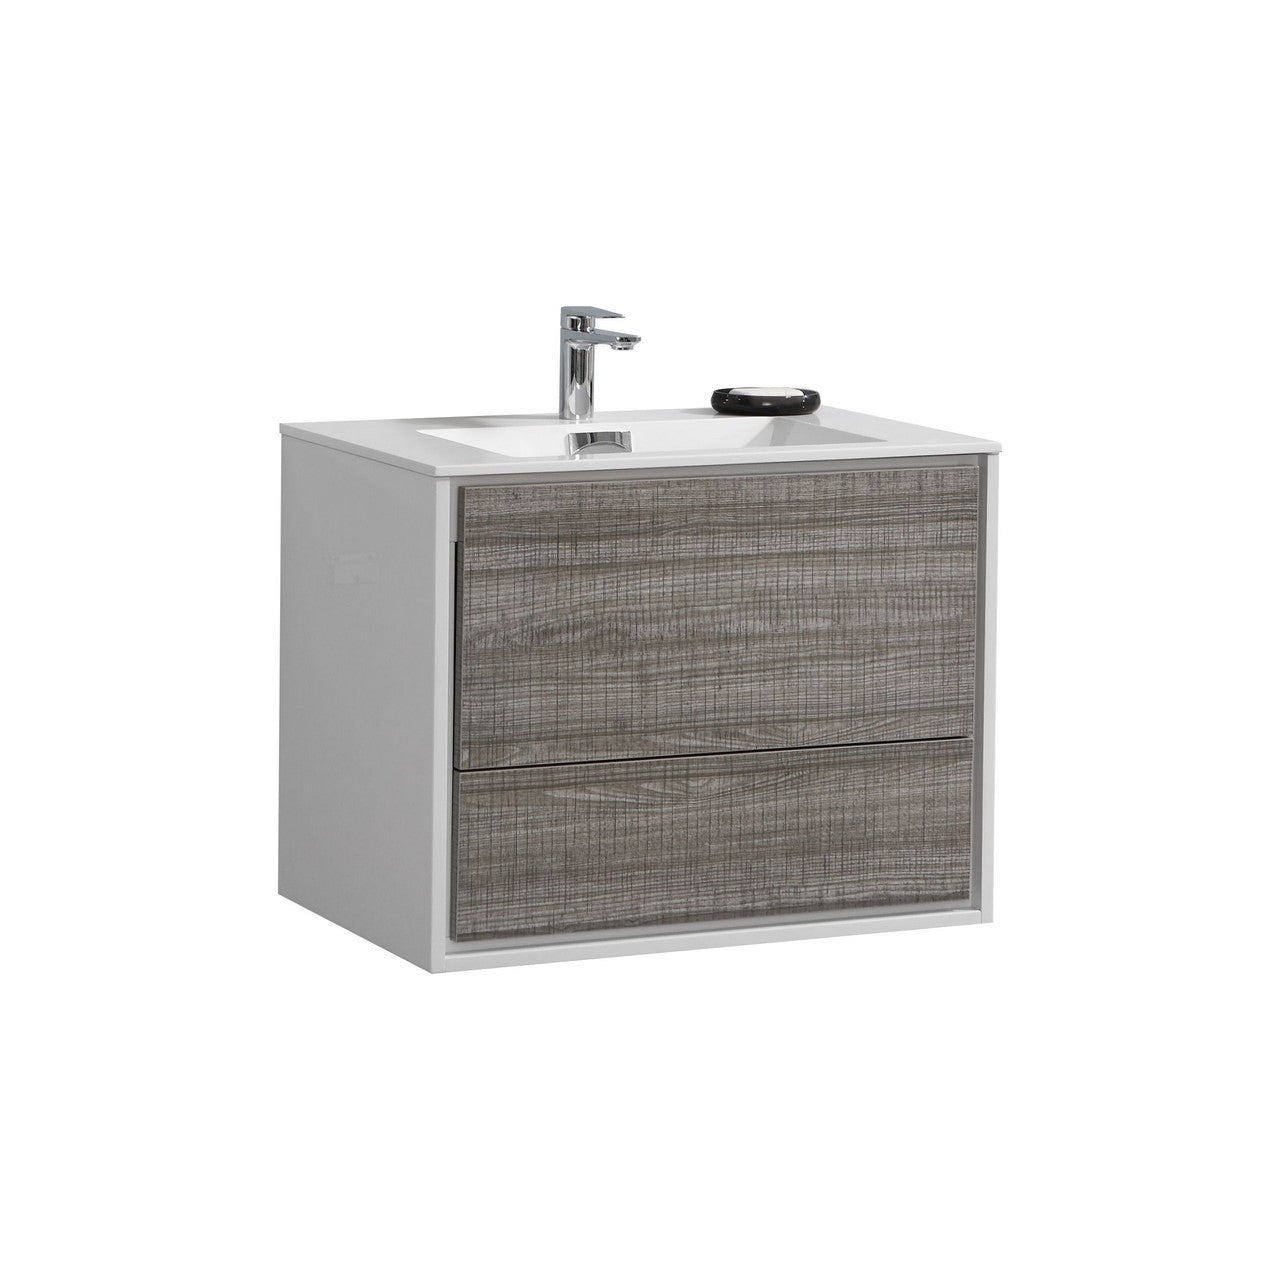 KUBEBATH De Lusso DL30-HGASH 30" Single Wall Mount Bathroom Vanity in Ash Gray with White Acrylic Composite, Integrated Sink, Angled View